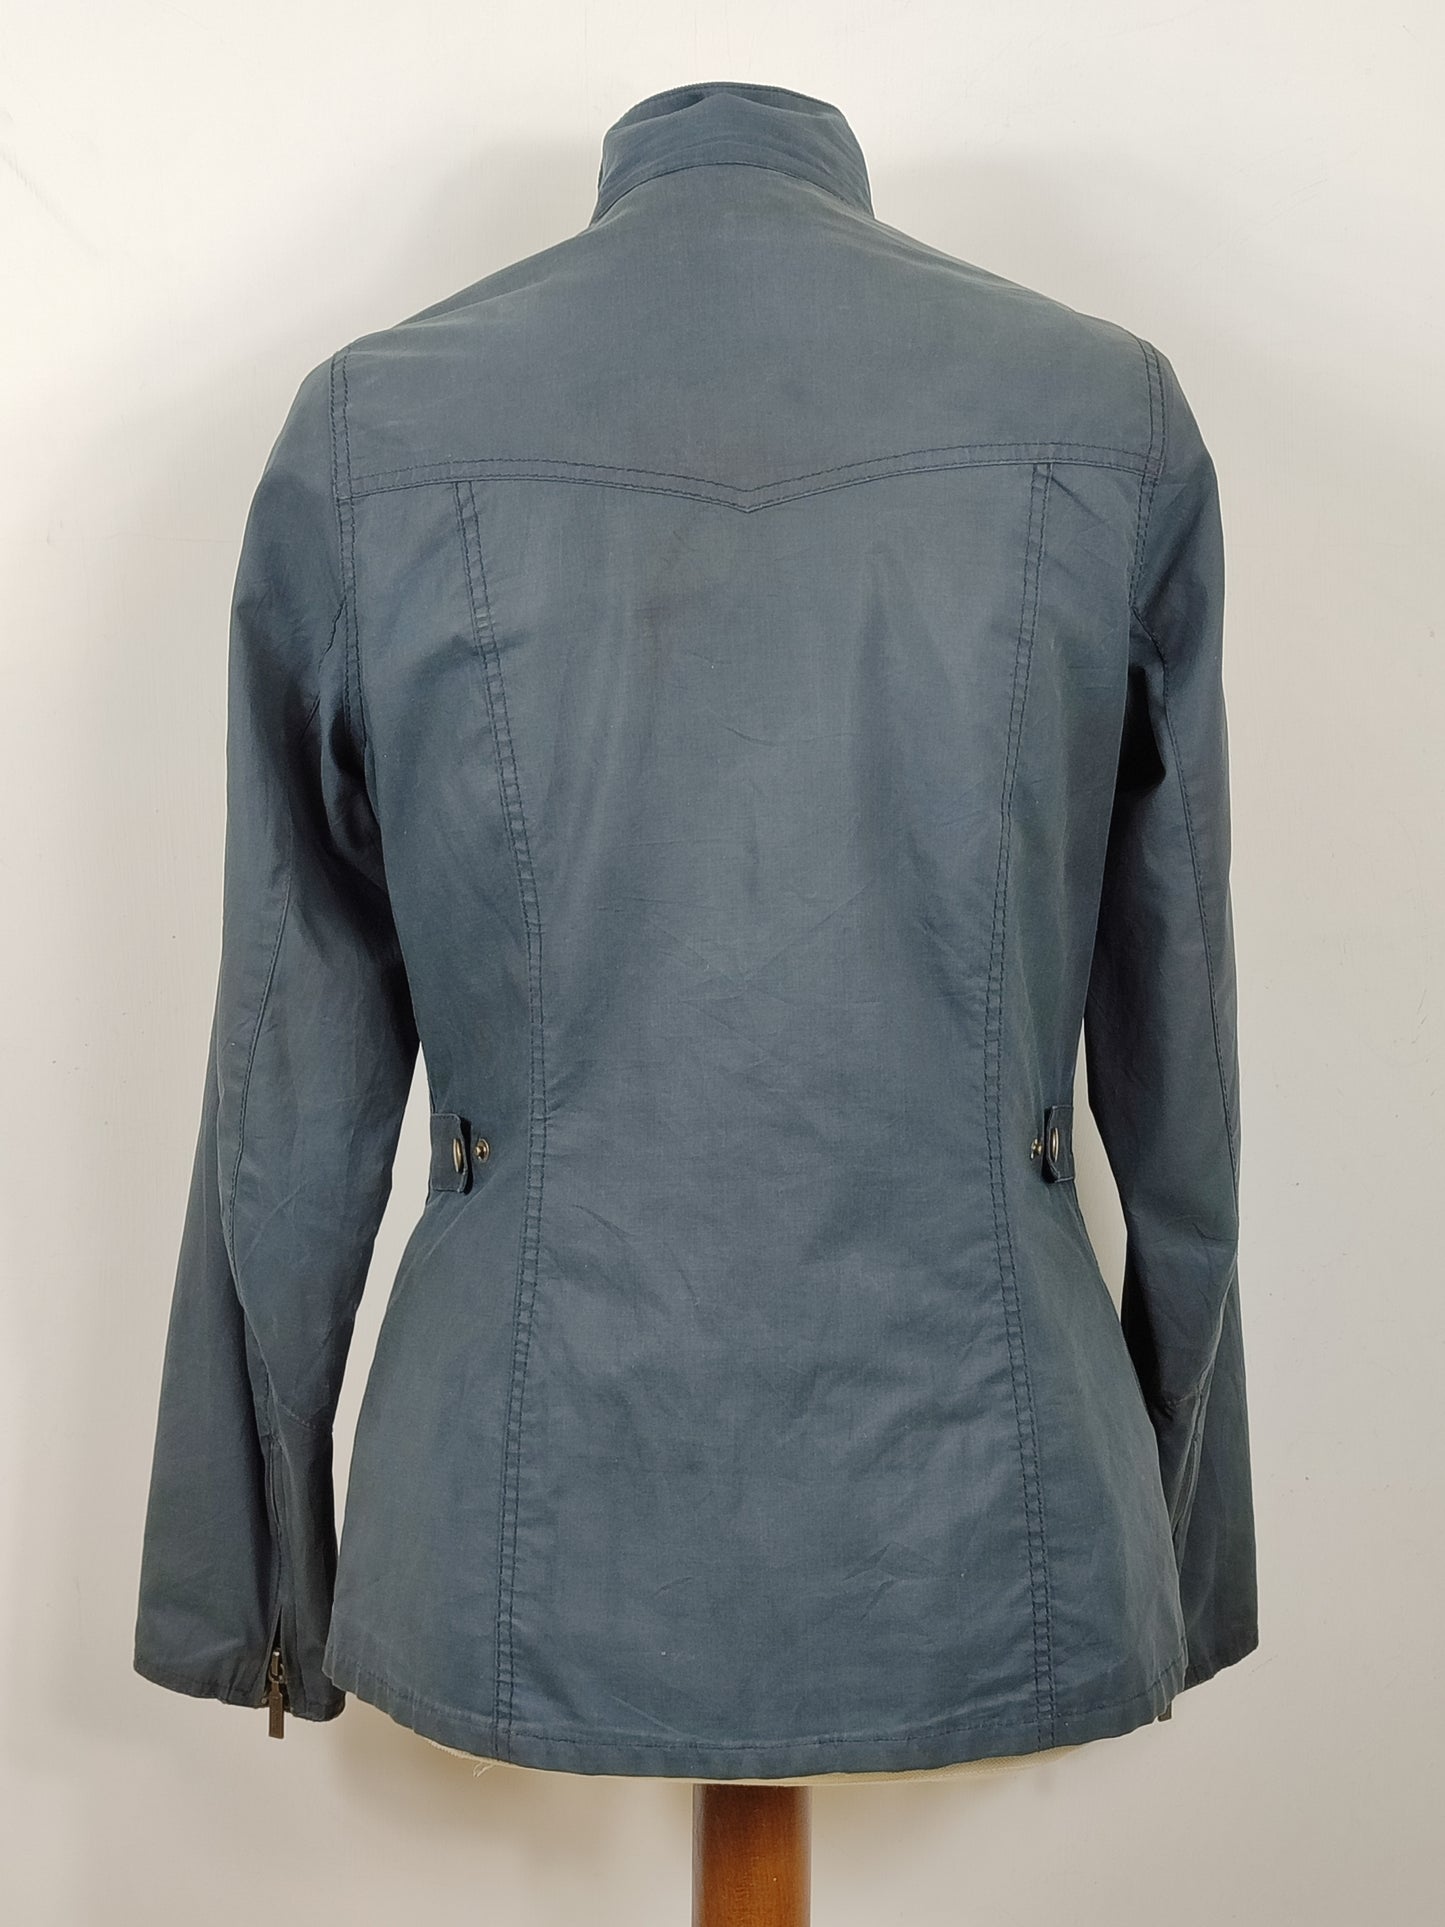 Giacca Barbour Morris corta donna blu UK10 Small  Navy short Lady wax Utility jacket Small tg.40